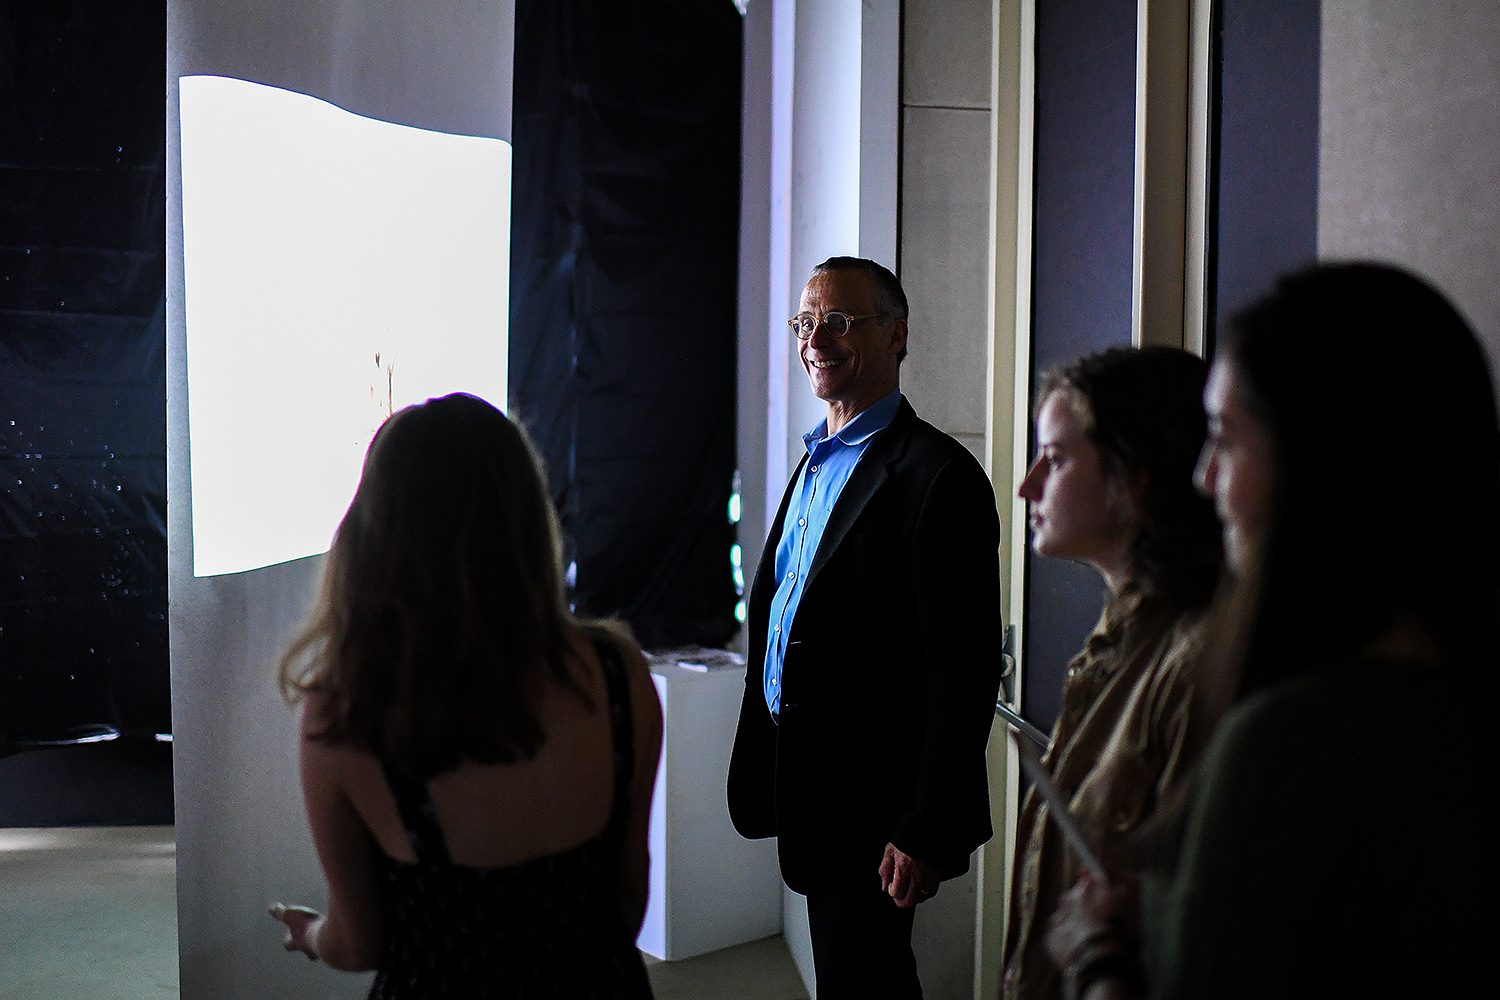 Wesleyan President Michael Roth attended the artists' reception on April 11.